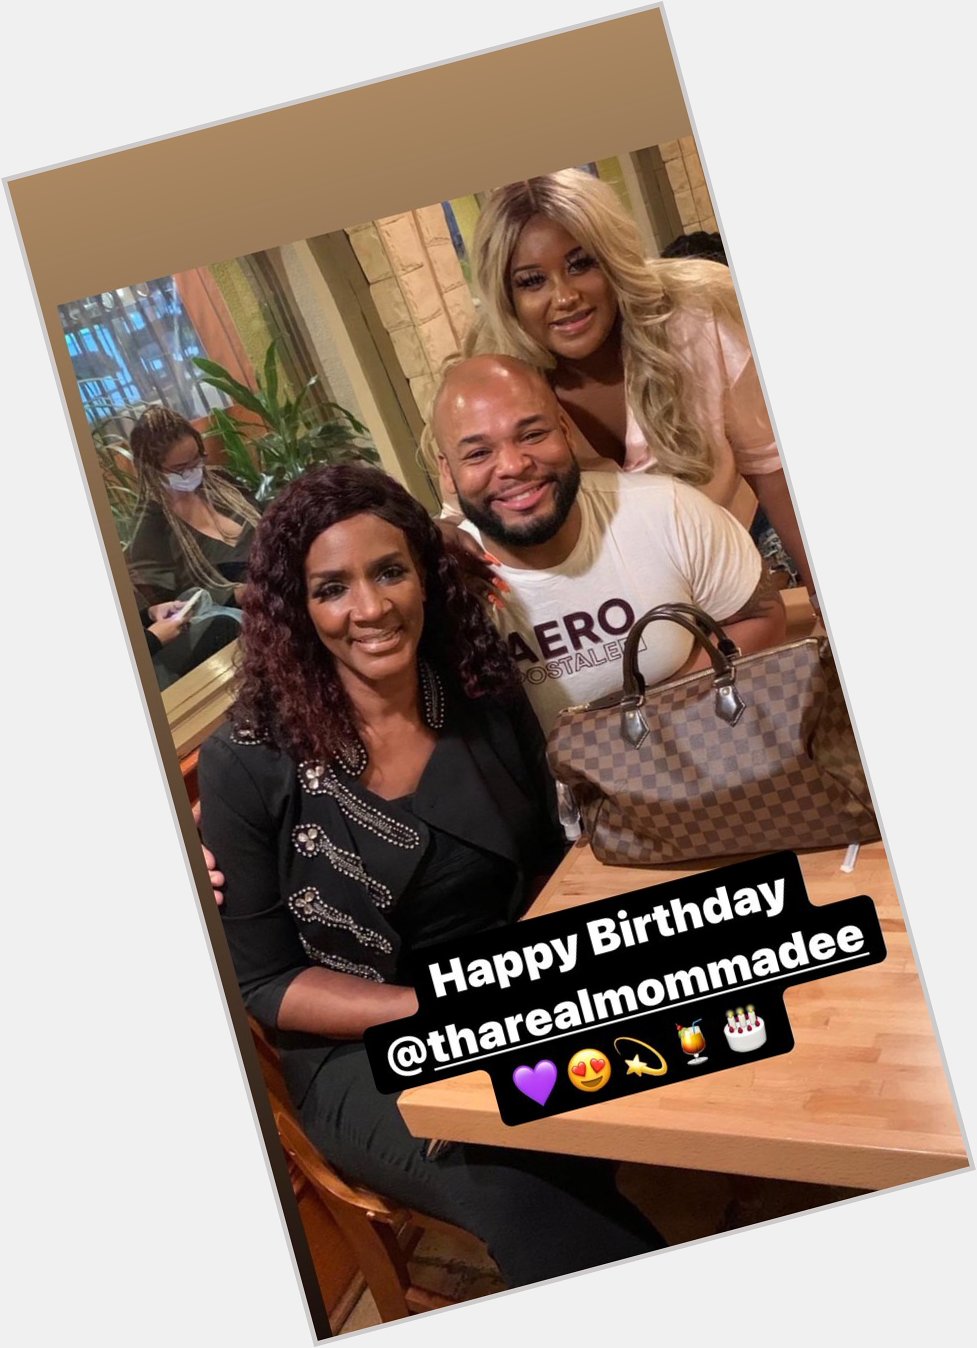 Happy birthday Momma Dee!!     (they had dinner with me for my birthday in May  ) 